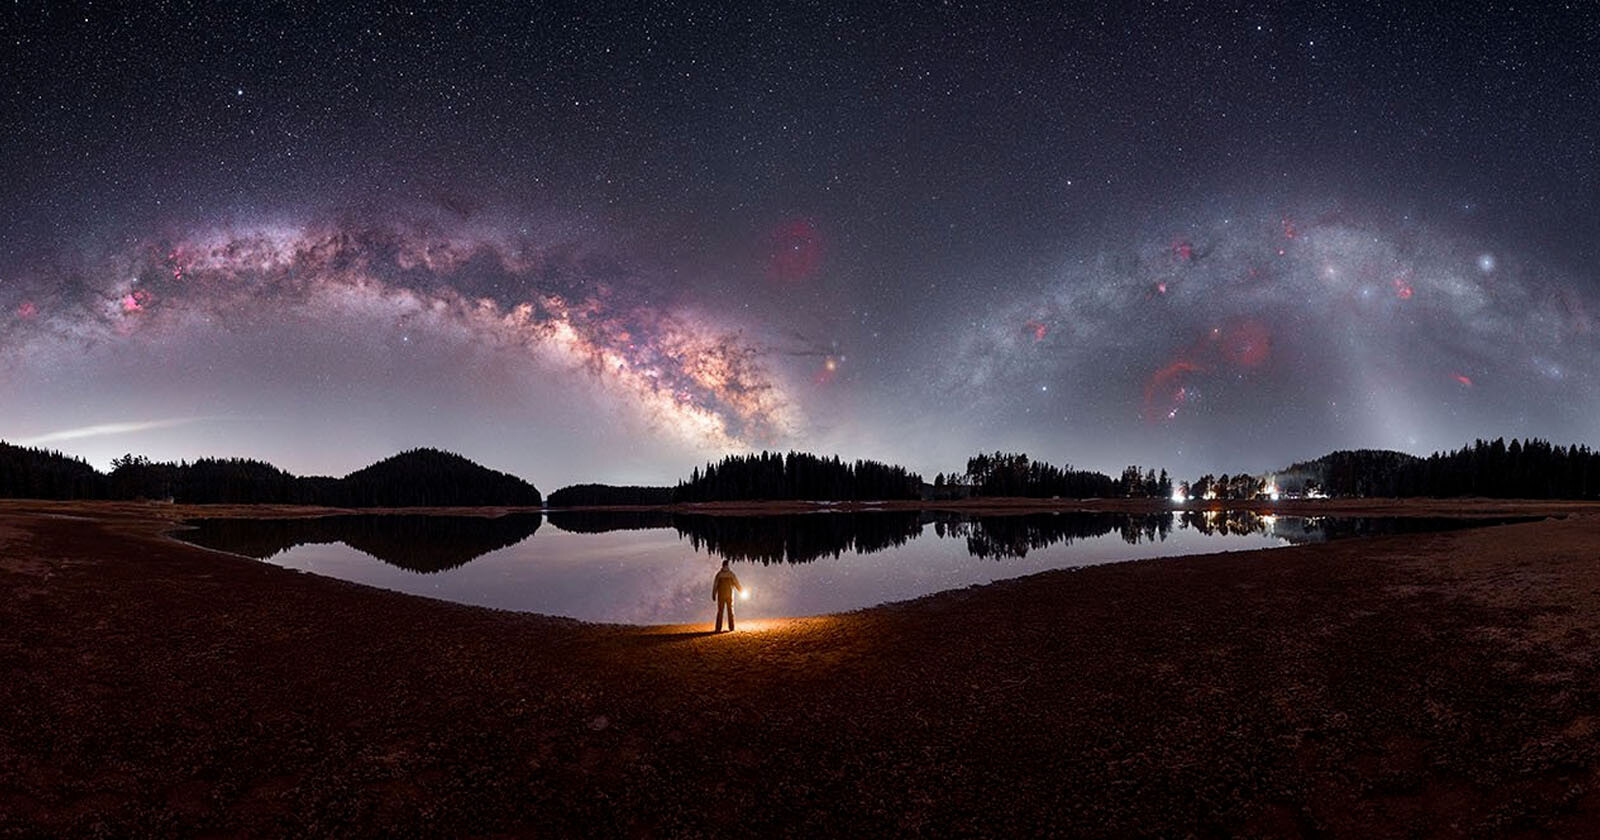 Making an Impossible Multi-Season, Time-Blended Milky Way Panorama